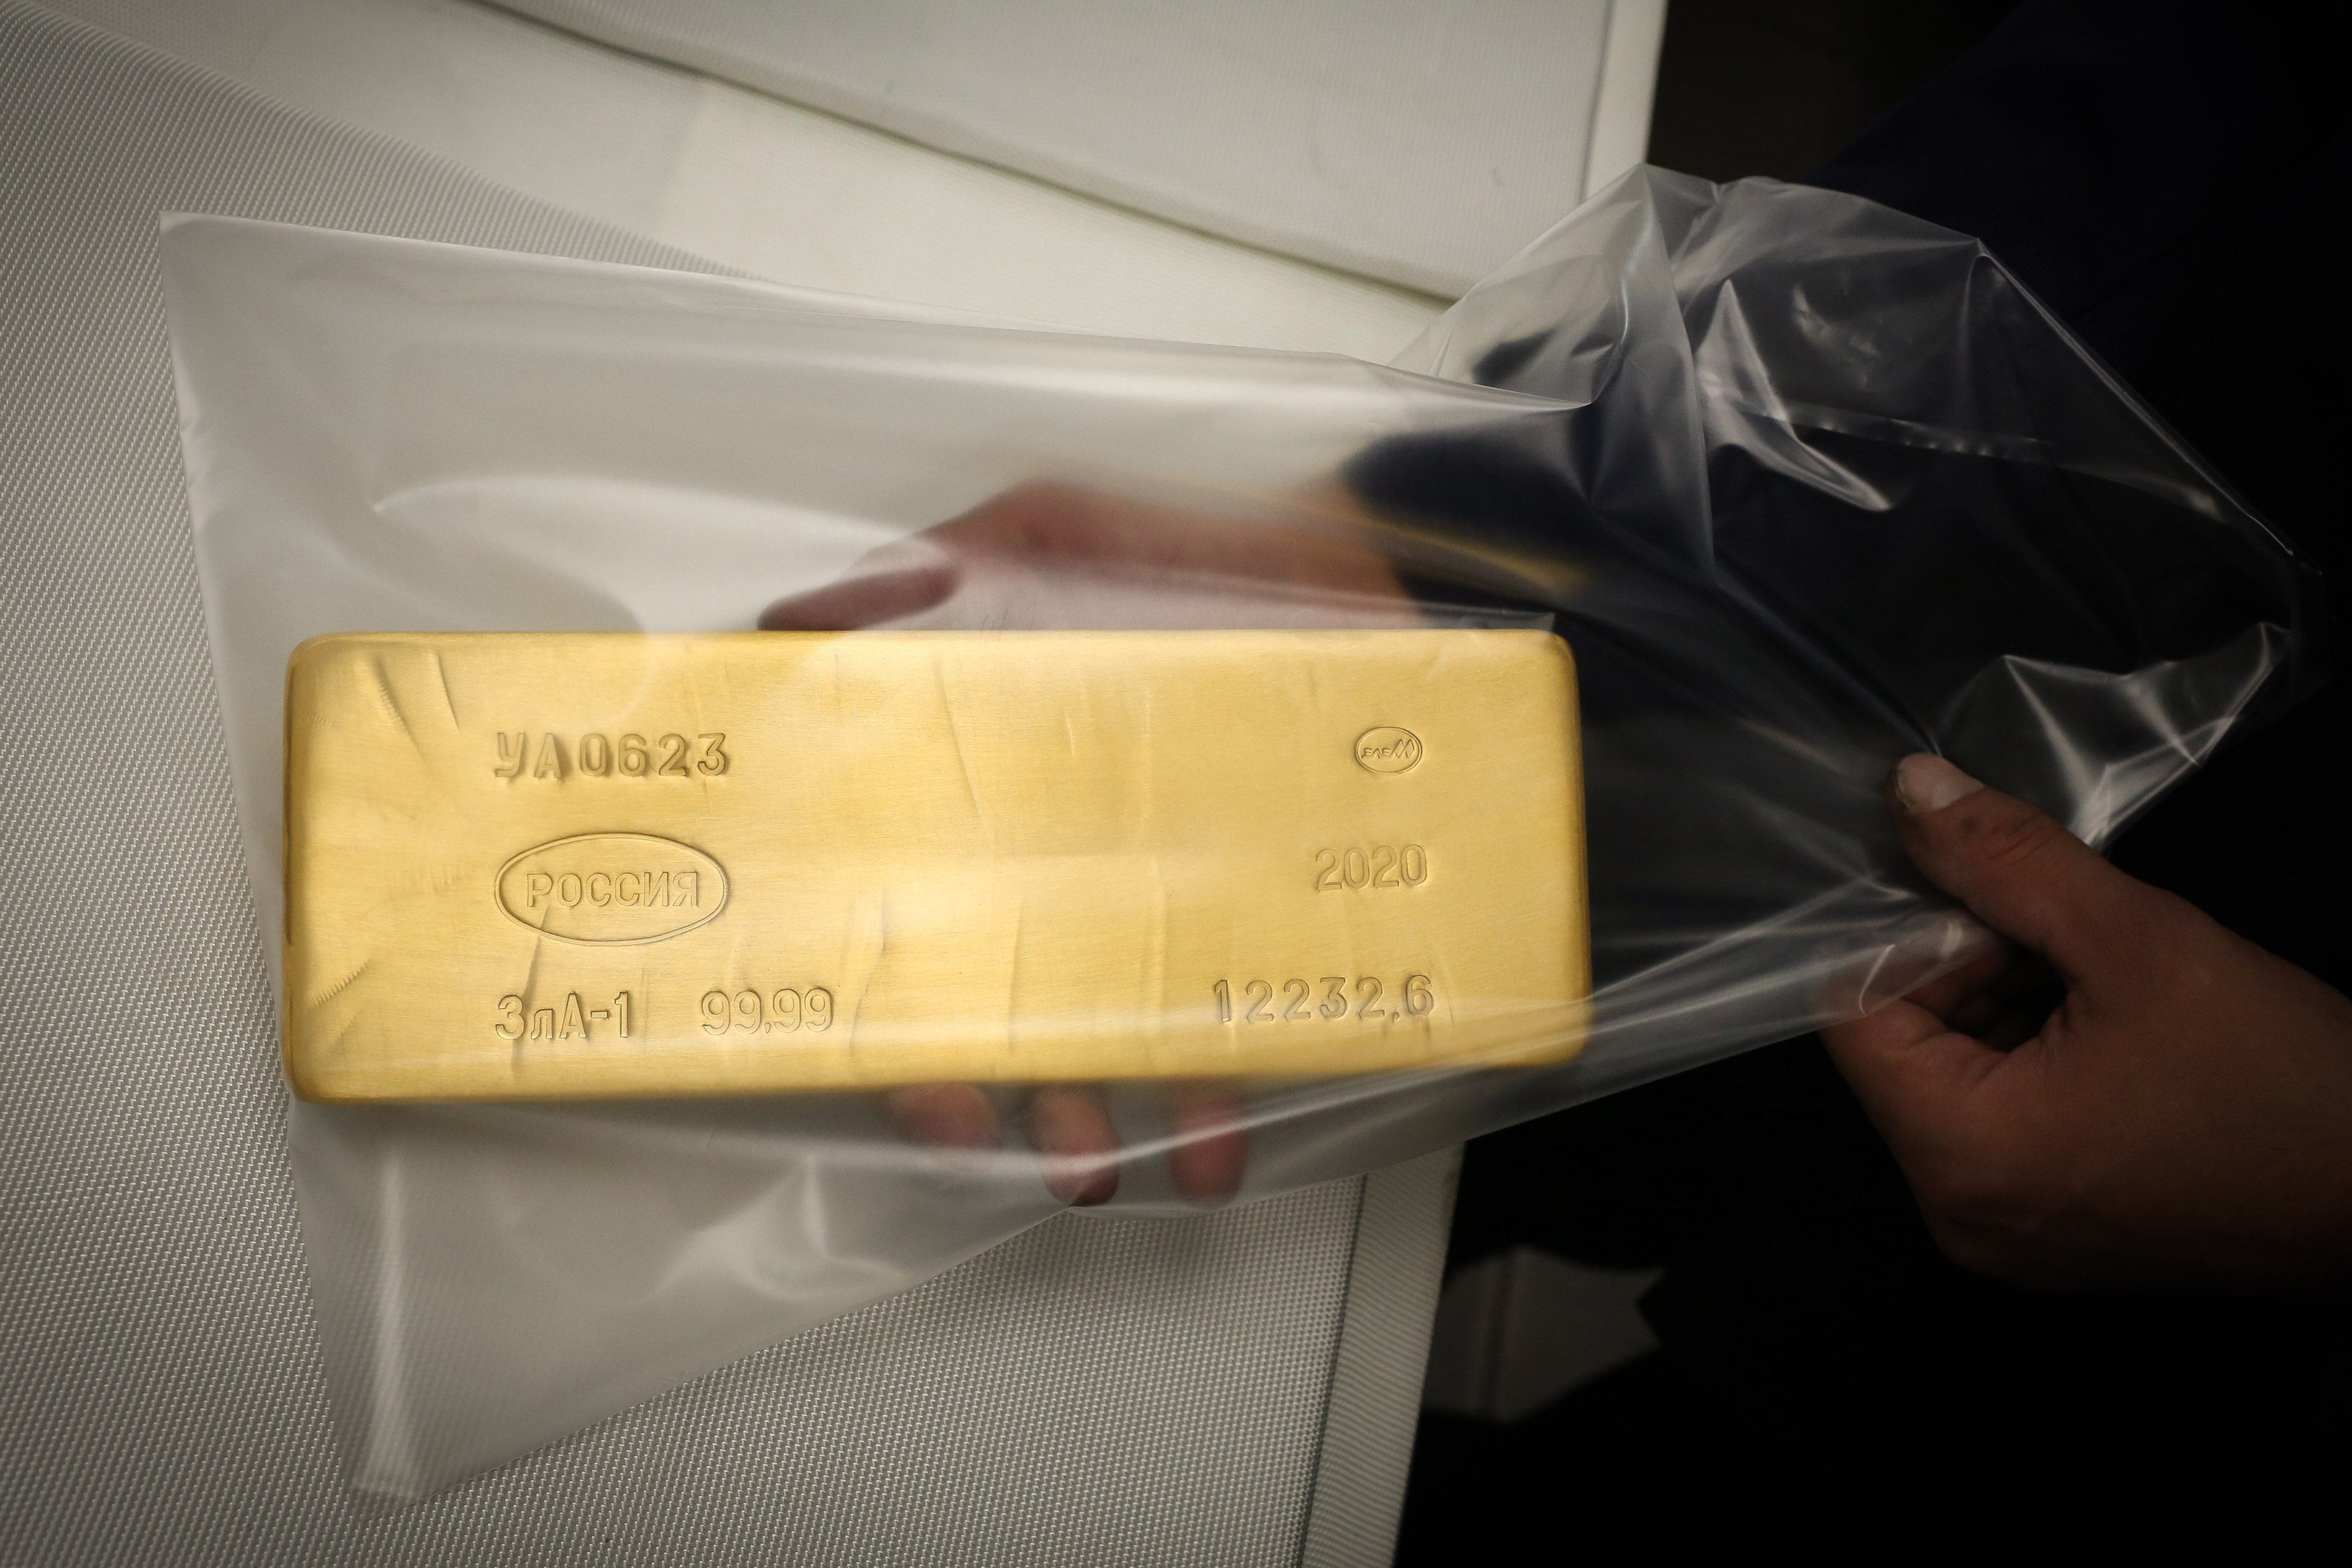 A worker seals a 12.5 kilogram gold ingot into a protective packet at the Uralelectromed Copper Refinery, operated by Ural Mining and Metallurgical Co. (UMMC), in Verkhnyaya Pyshma, Russia, on Thursday, July 30, 2020. Gold surged to a fresh record Friday fueled by a weaker dollar and low interest rates. Silver headed for its best month since 1979.